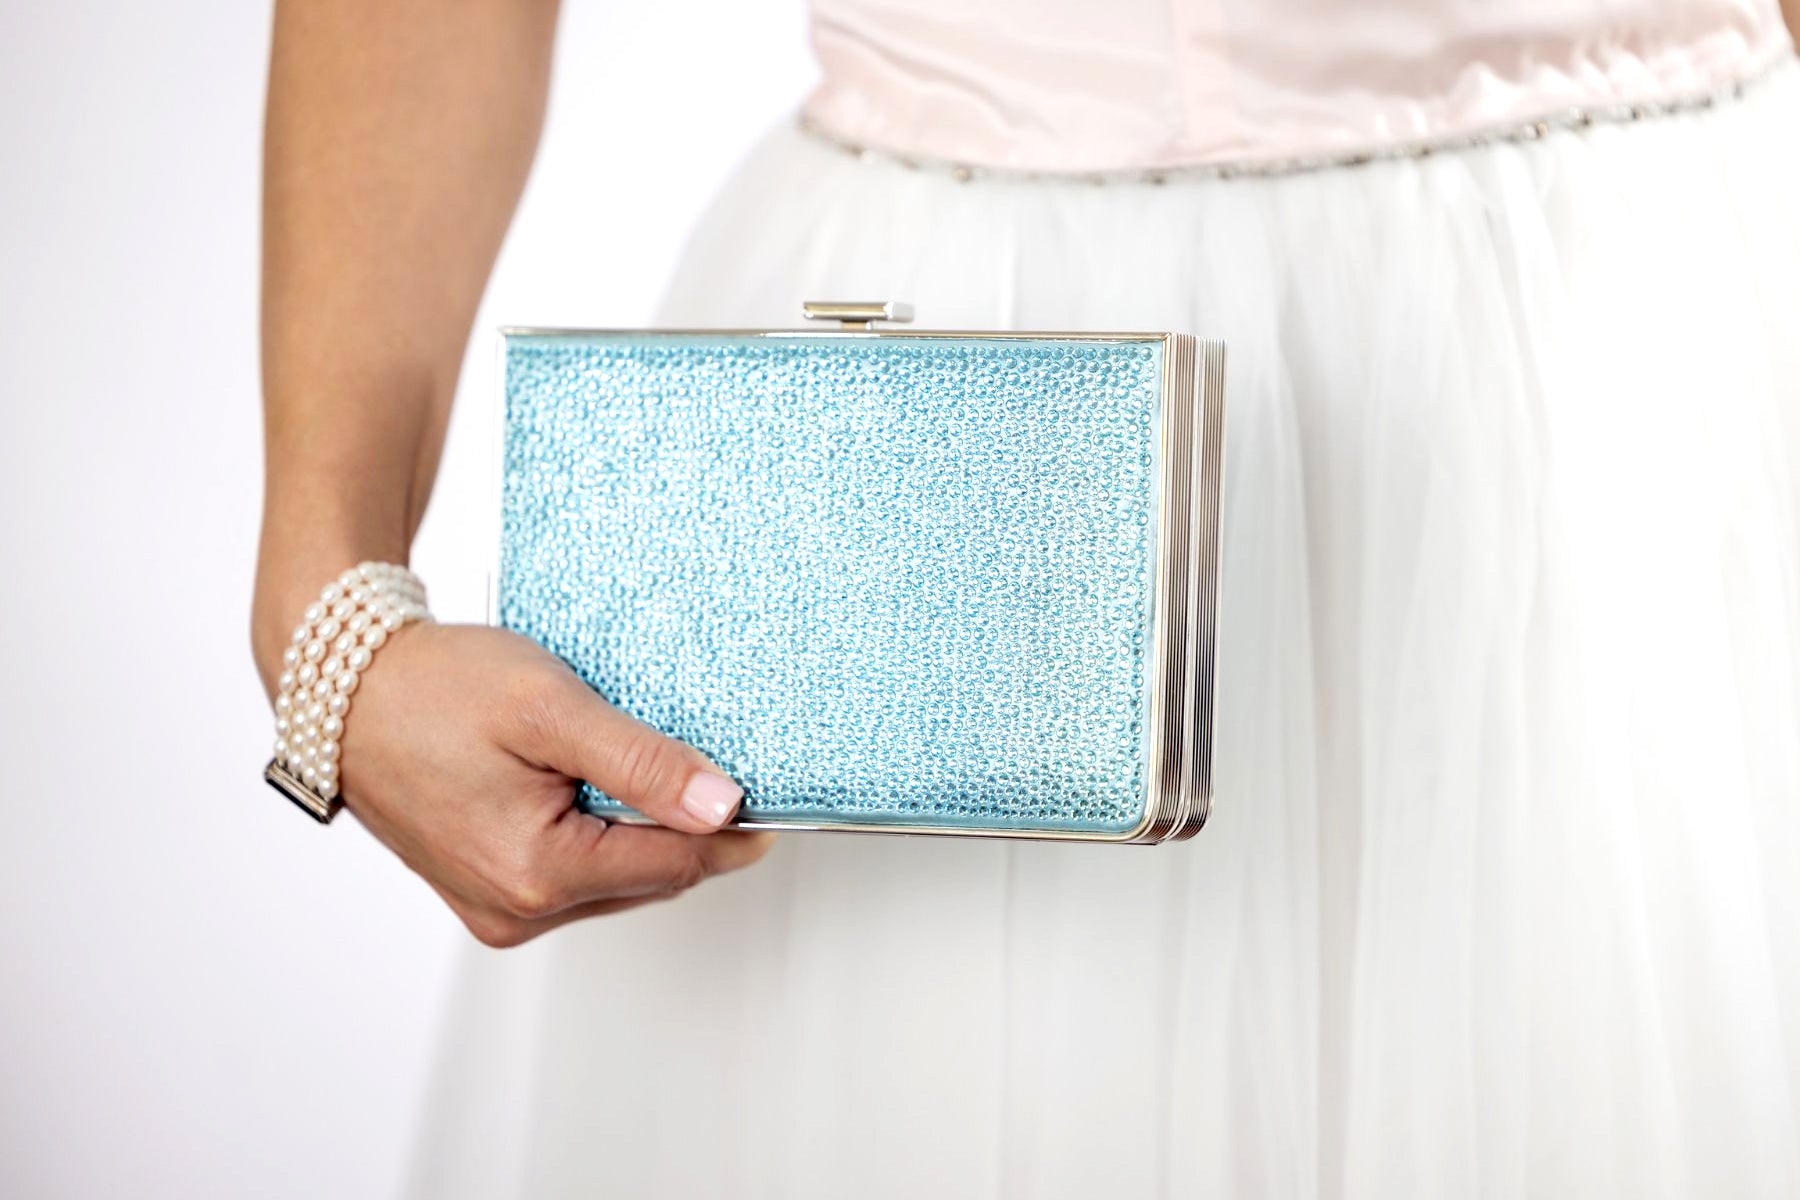 In Palm Beach, Florida, a woman wearing a white dress elegantly holds a Breakers Crystal Rhinestone Clutch from The Bella Rosa Collection.